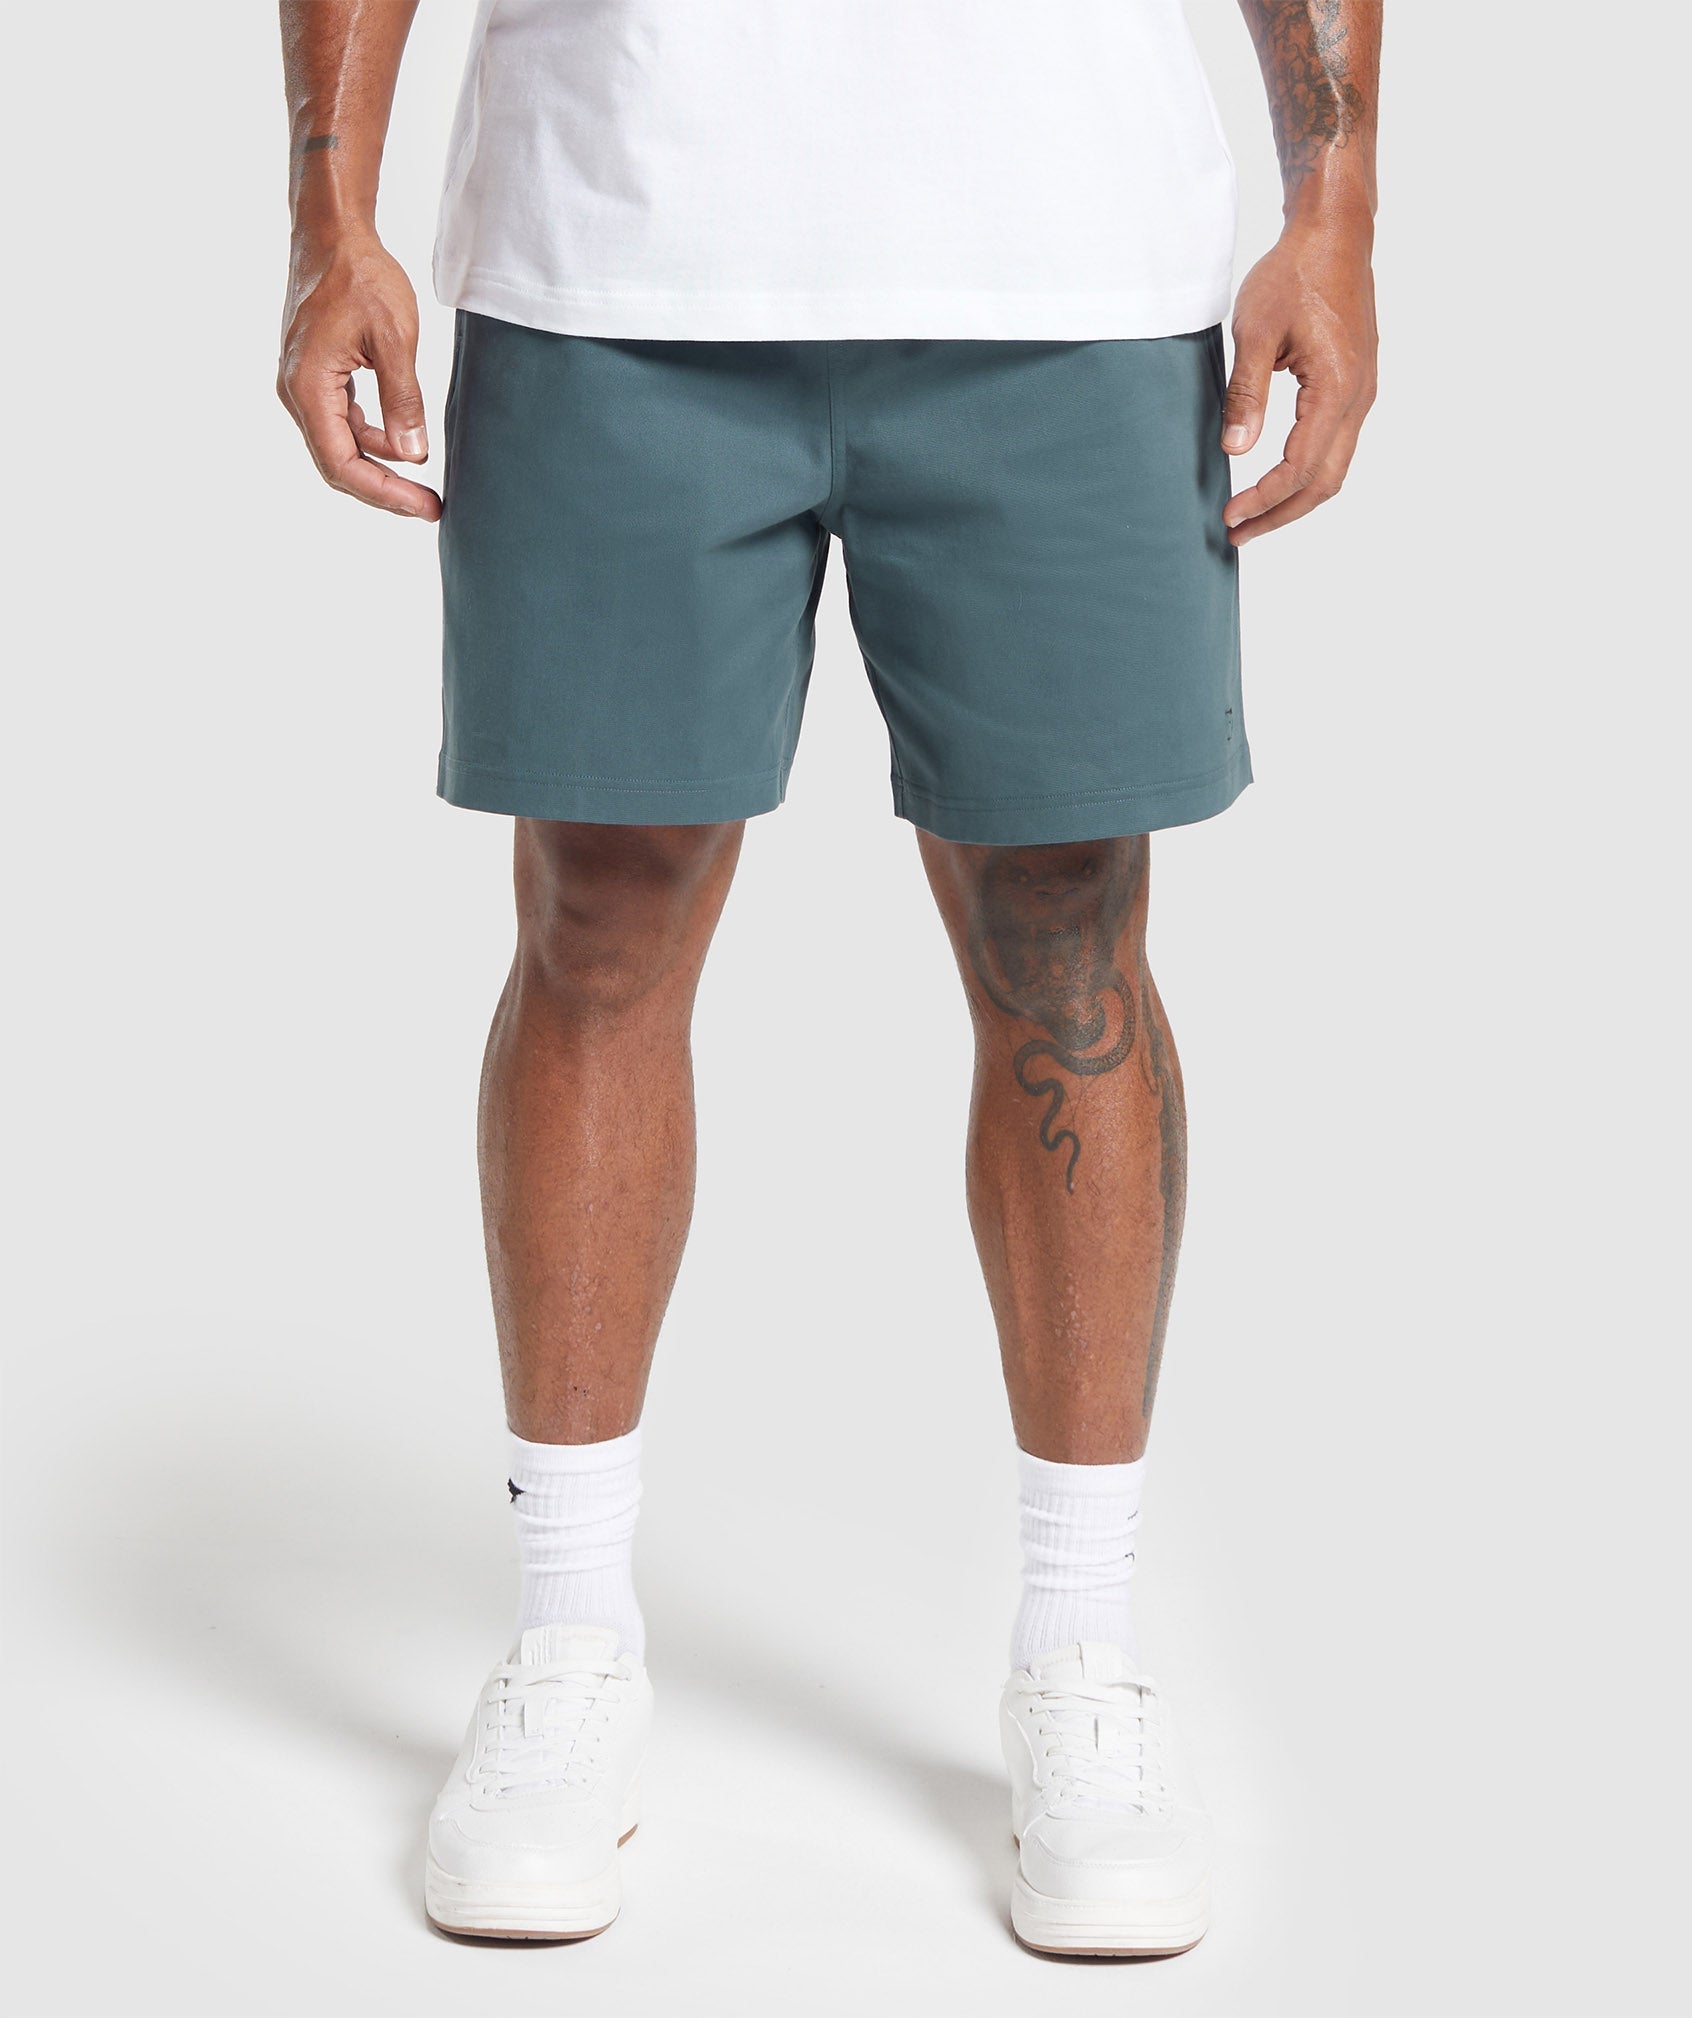 Rest Day Woven Shorts in Smokey Teal